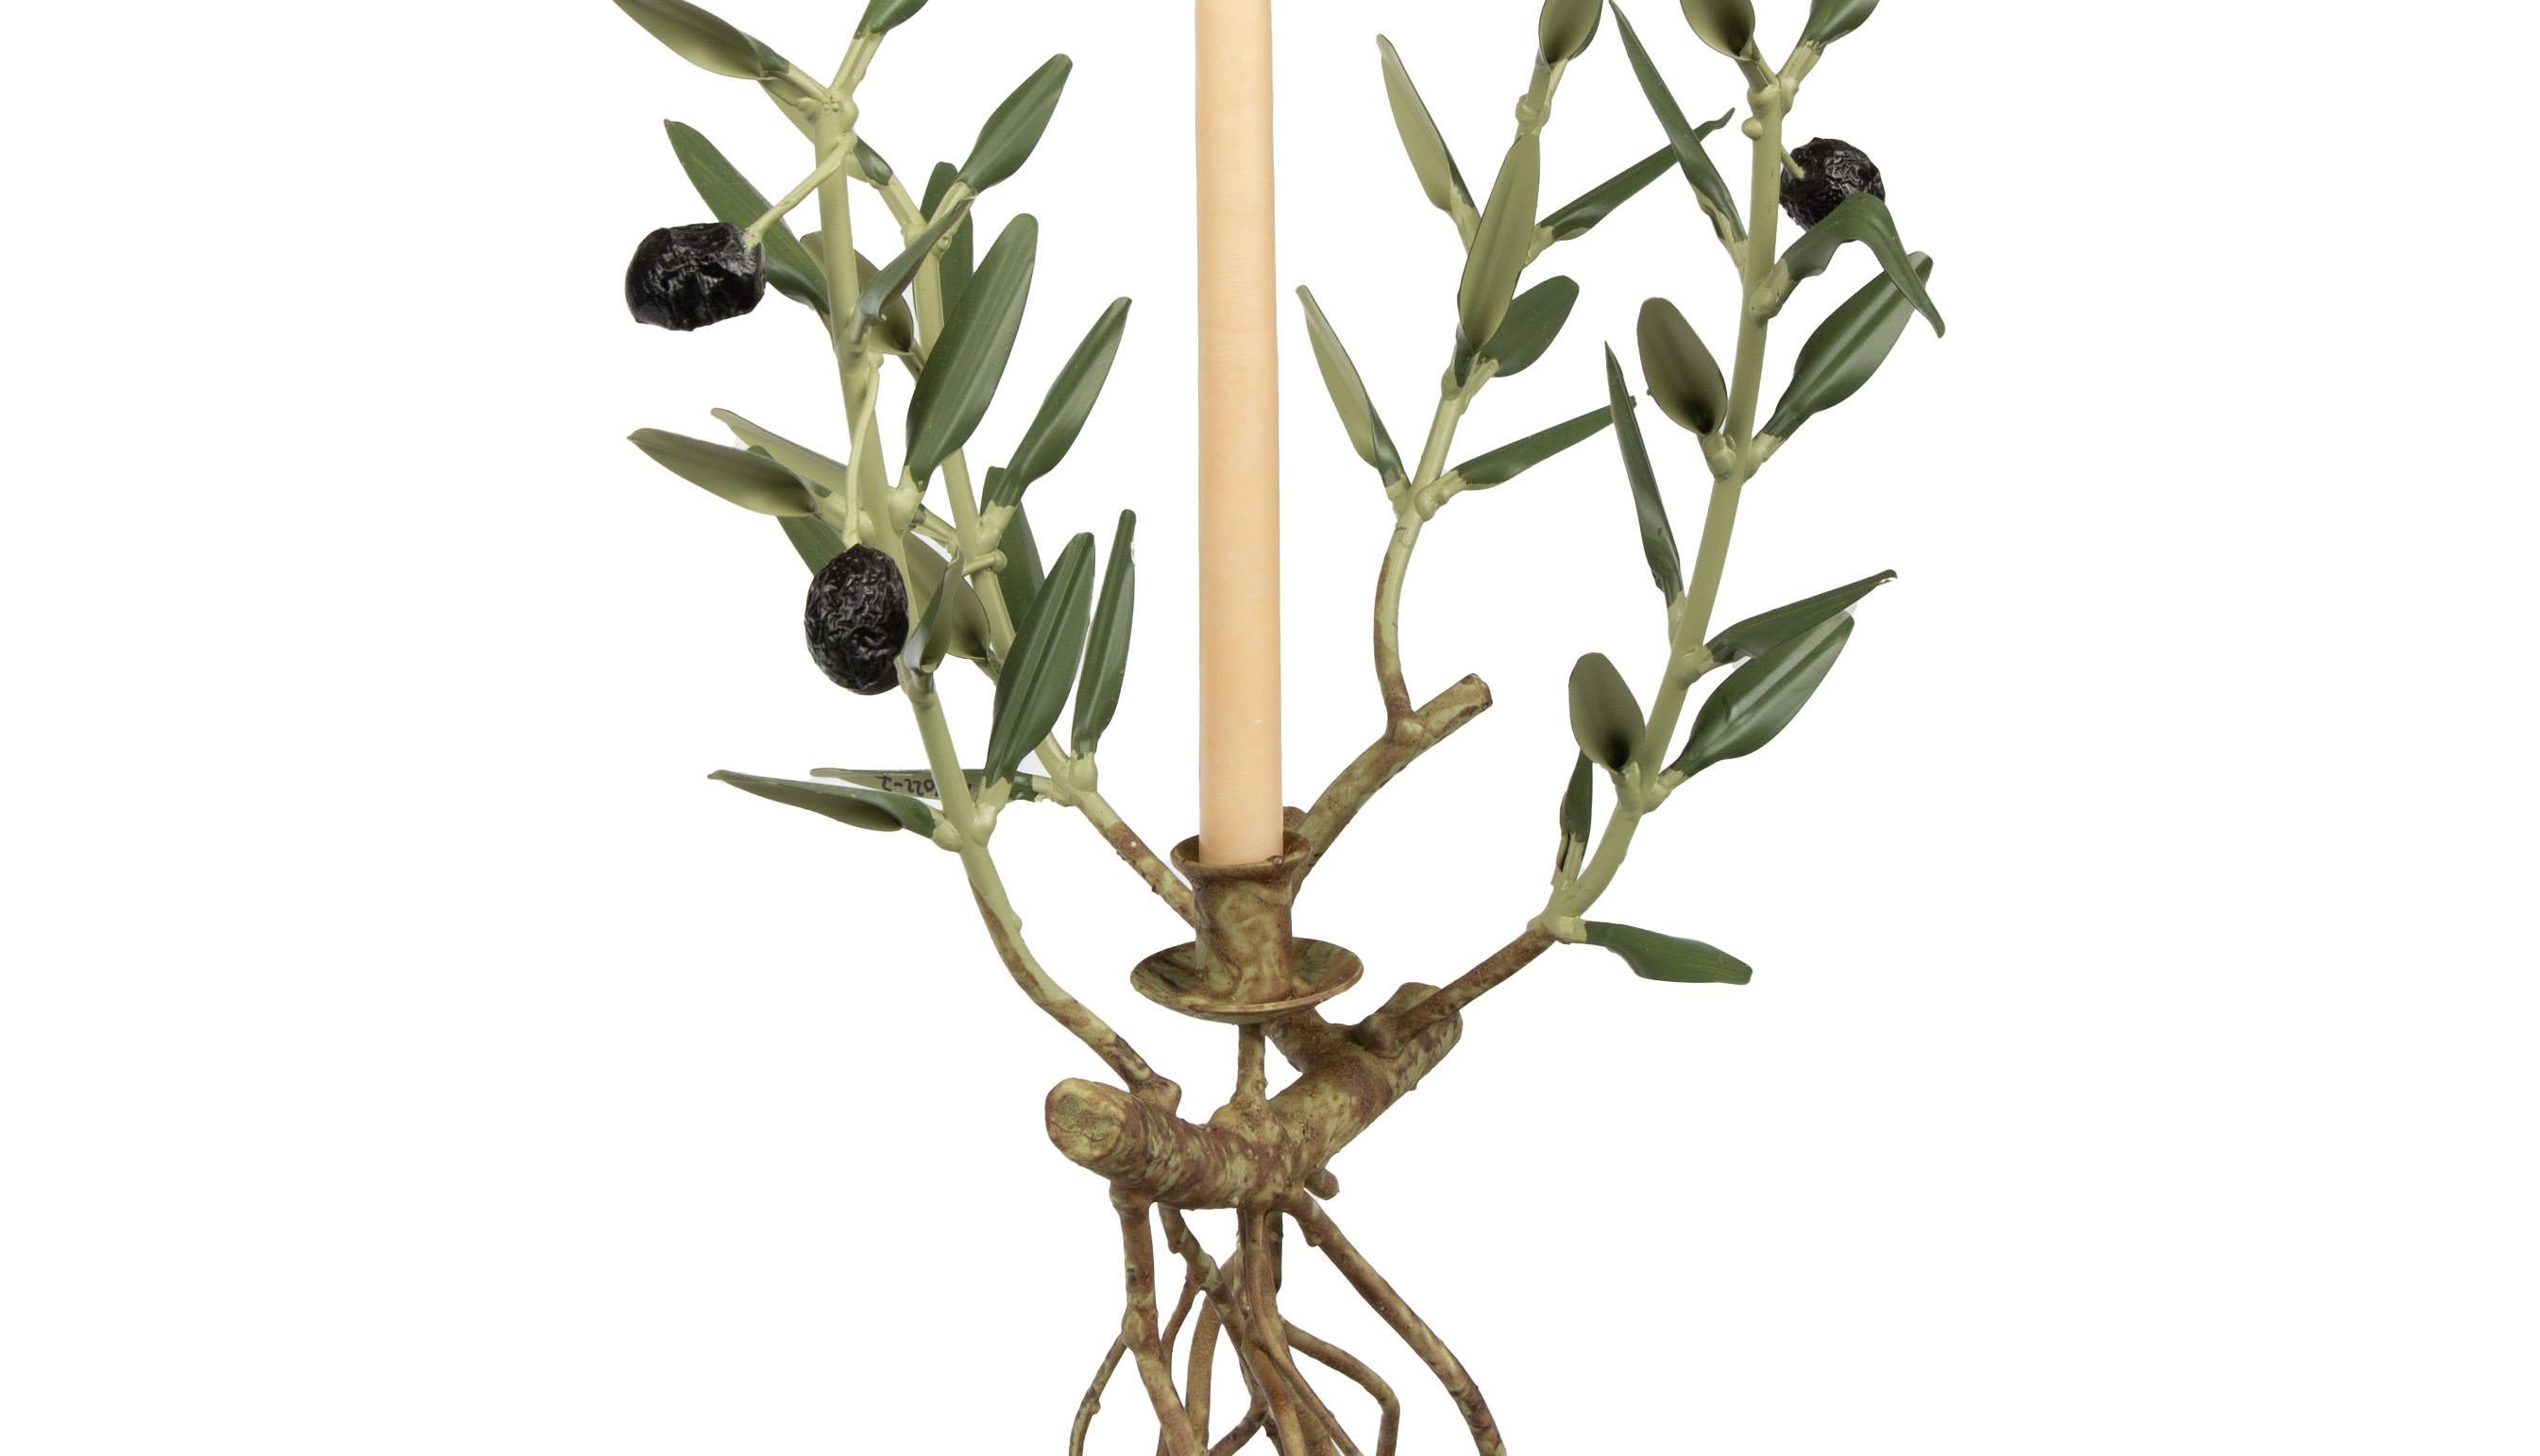 French Provincial Handmade Olive Branch with Roots Candle Holder from Provence For Sale